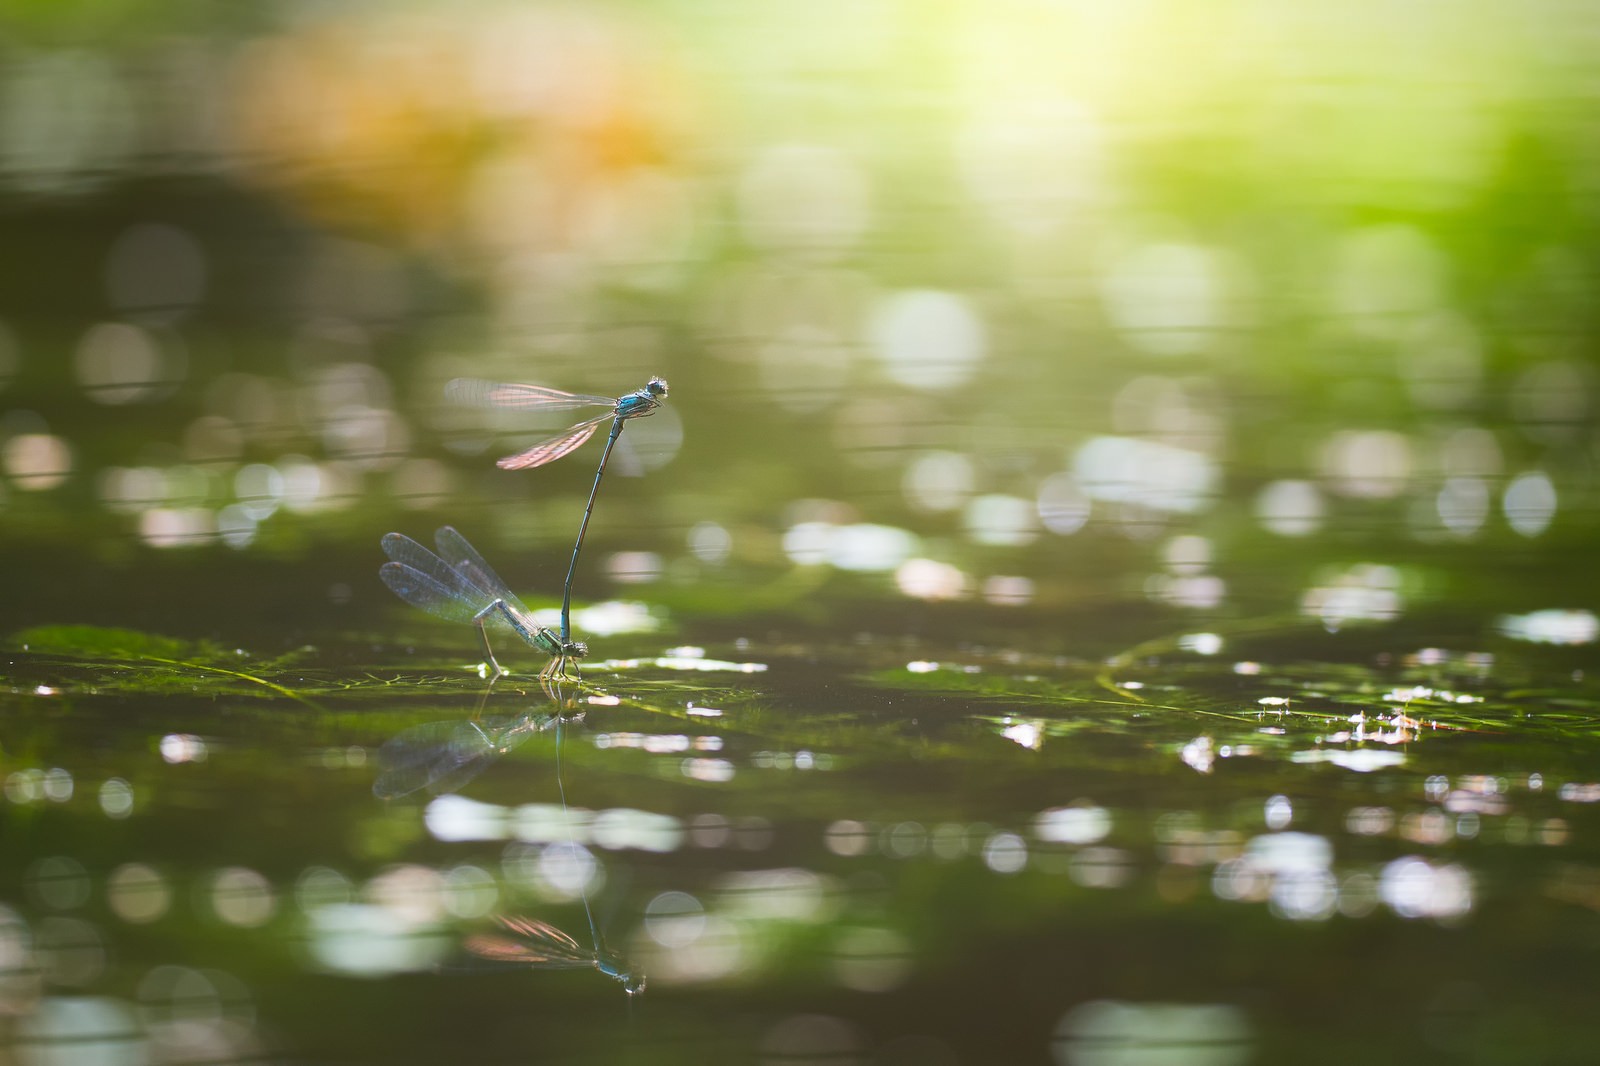 photography, Bokeh, Macro, Dragonflies, Insect, Water, Leaves Wallpaper